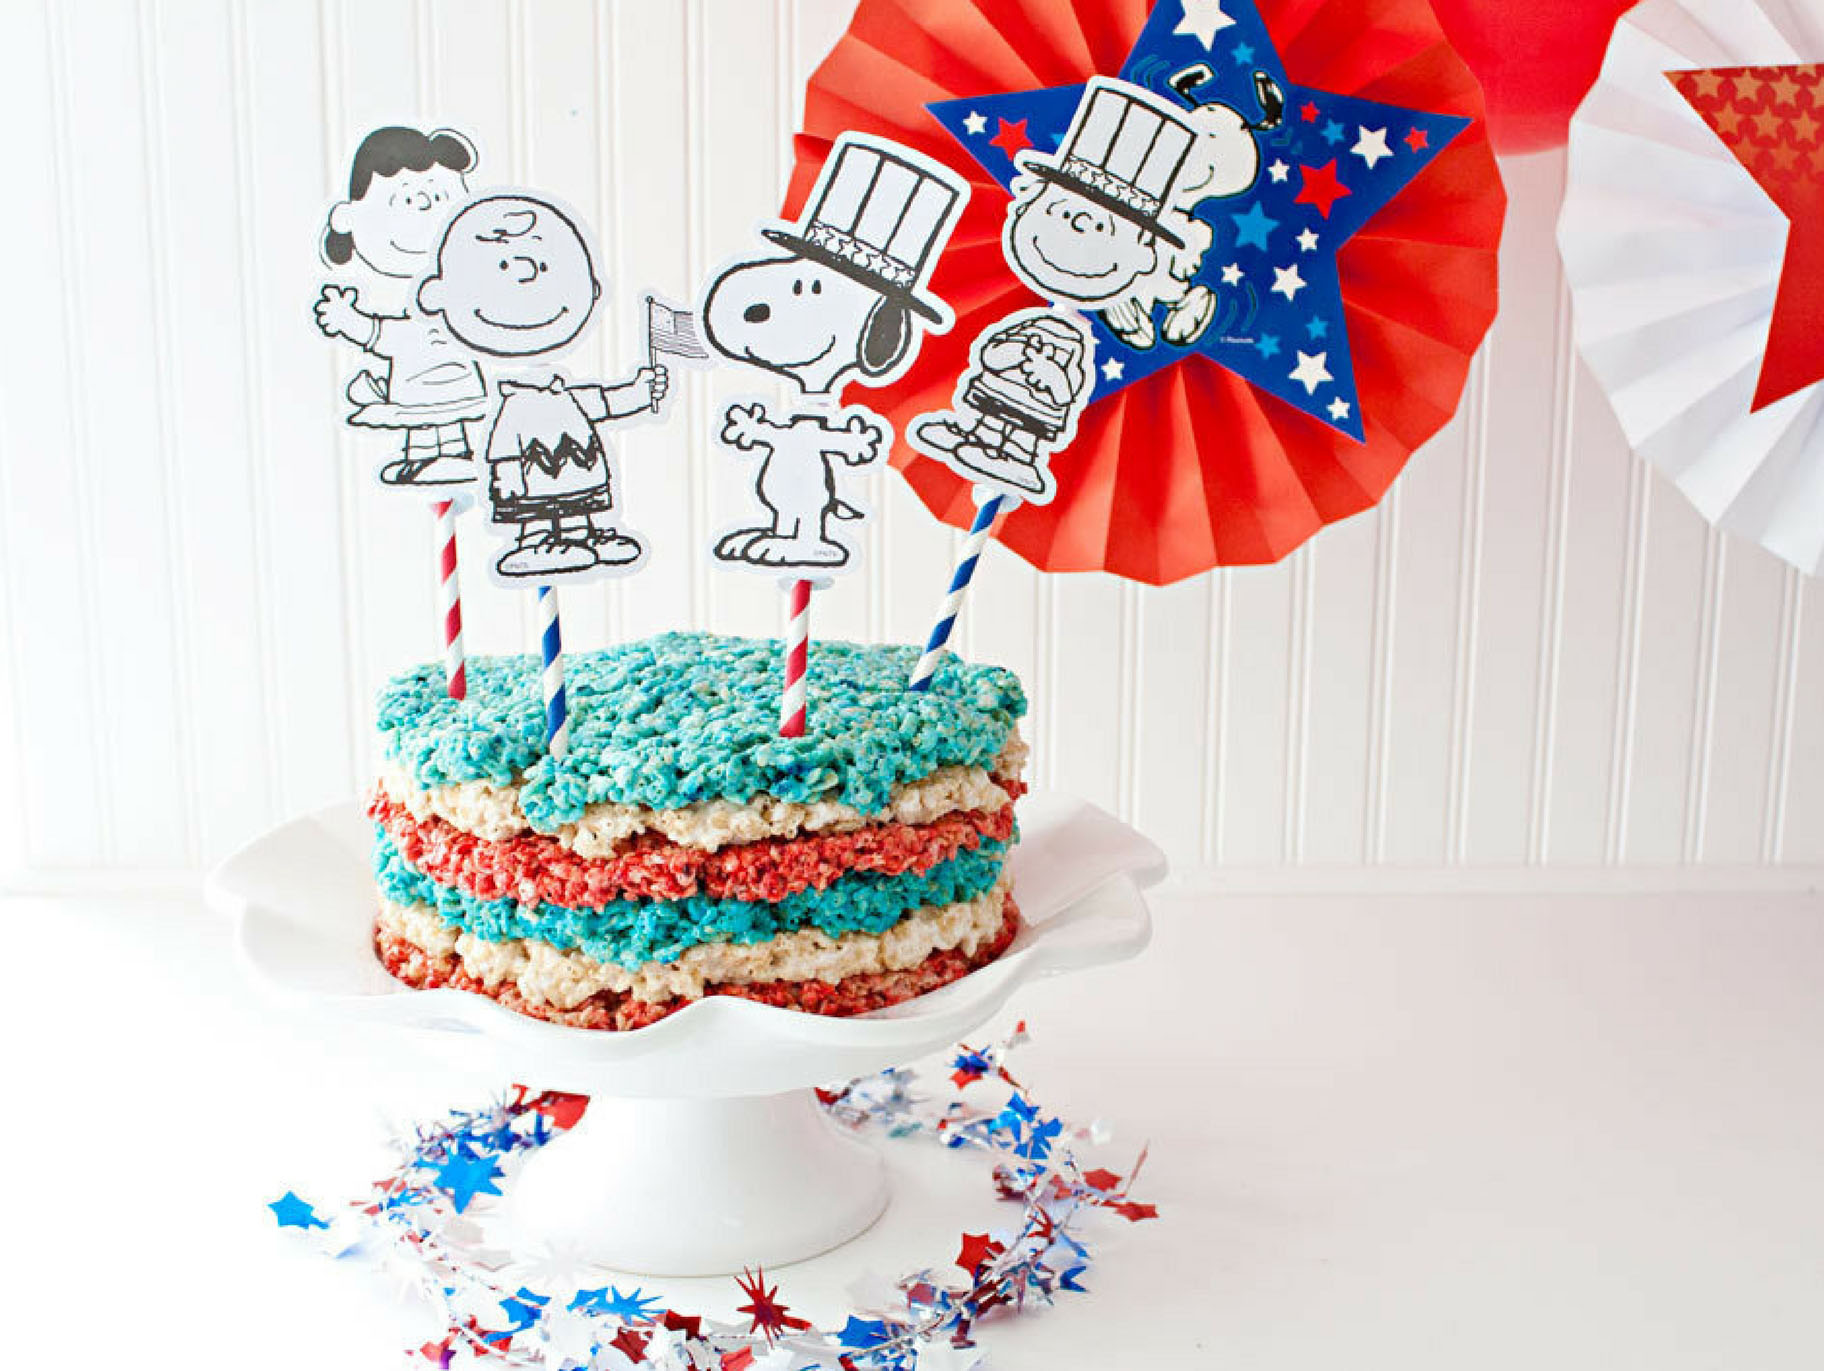 RICE KRISPIES TREATS® Cake - My Food and Family